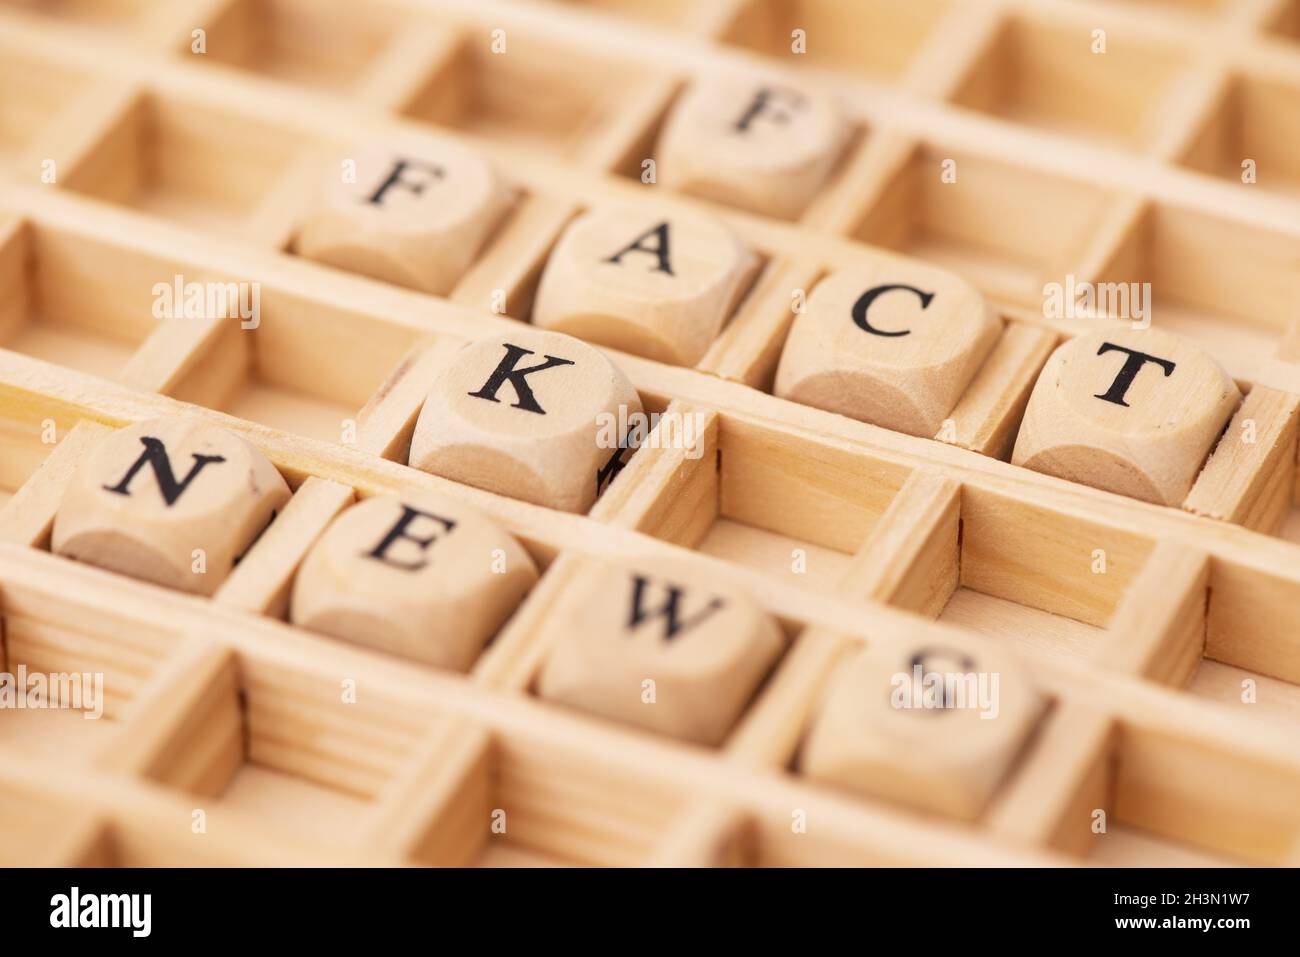 Fact News und Fake News in wordcloud Stockfoto